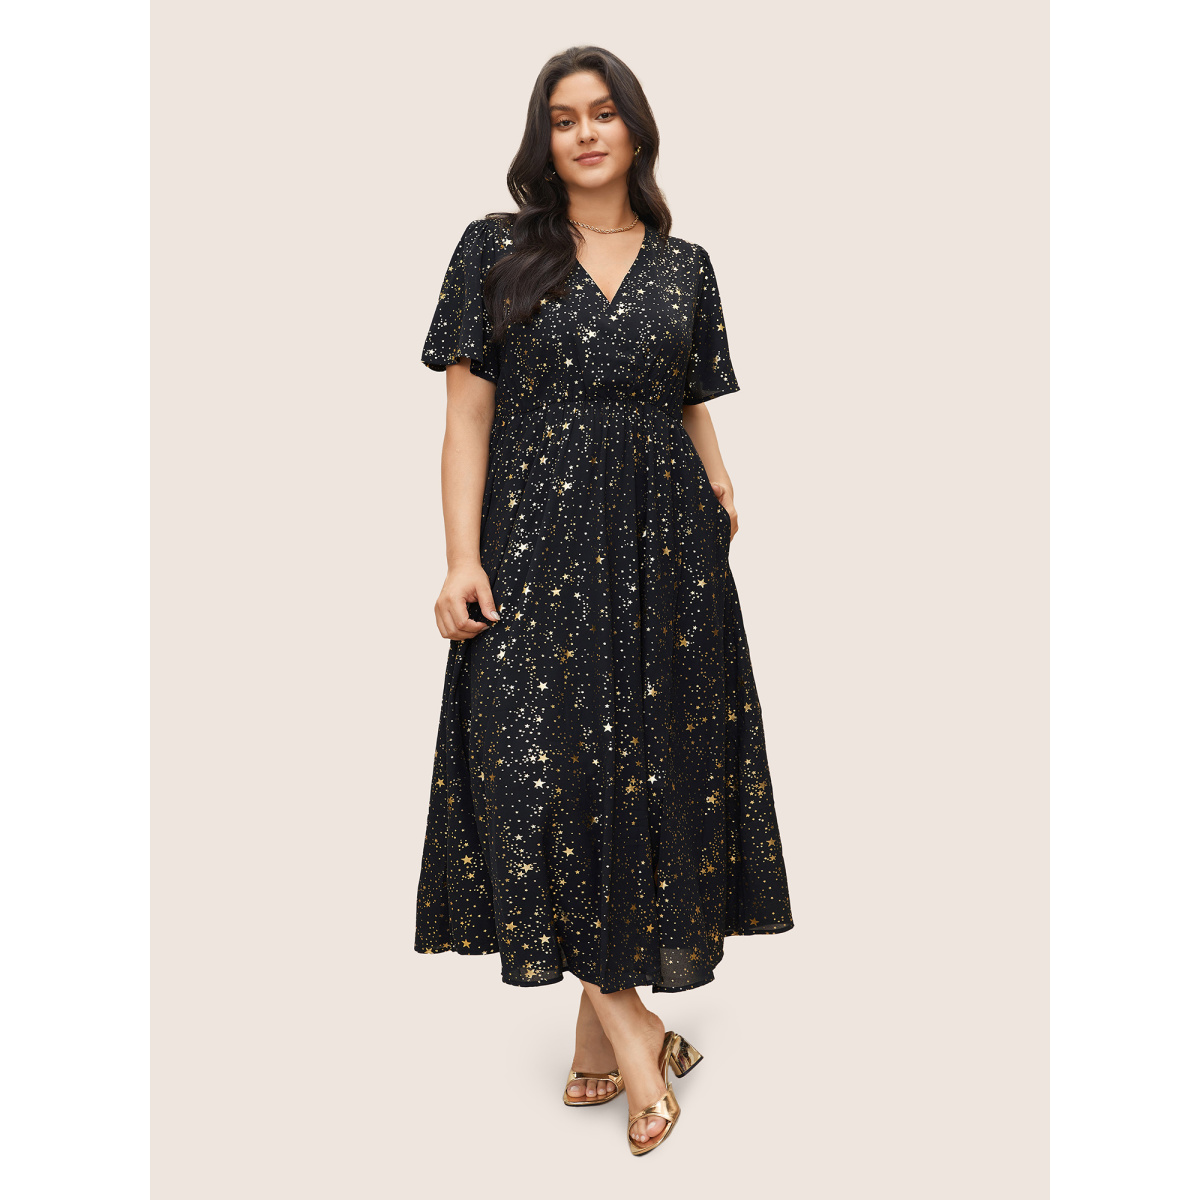 

Moon and Star Galaxy Print Plus Size Dress Women Party Pocket Ruffle Sleeve Short Sleeve V Neck Pocket Going out Long Dress BloomChic, Black